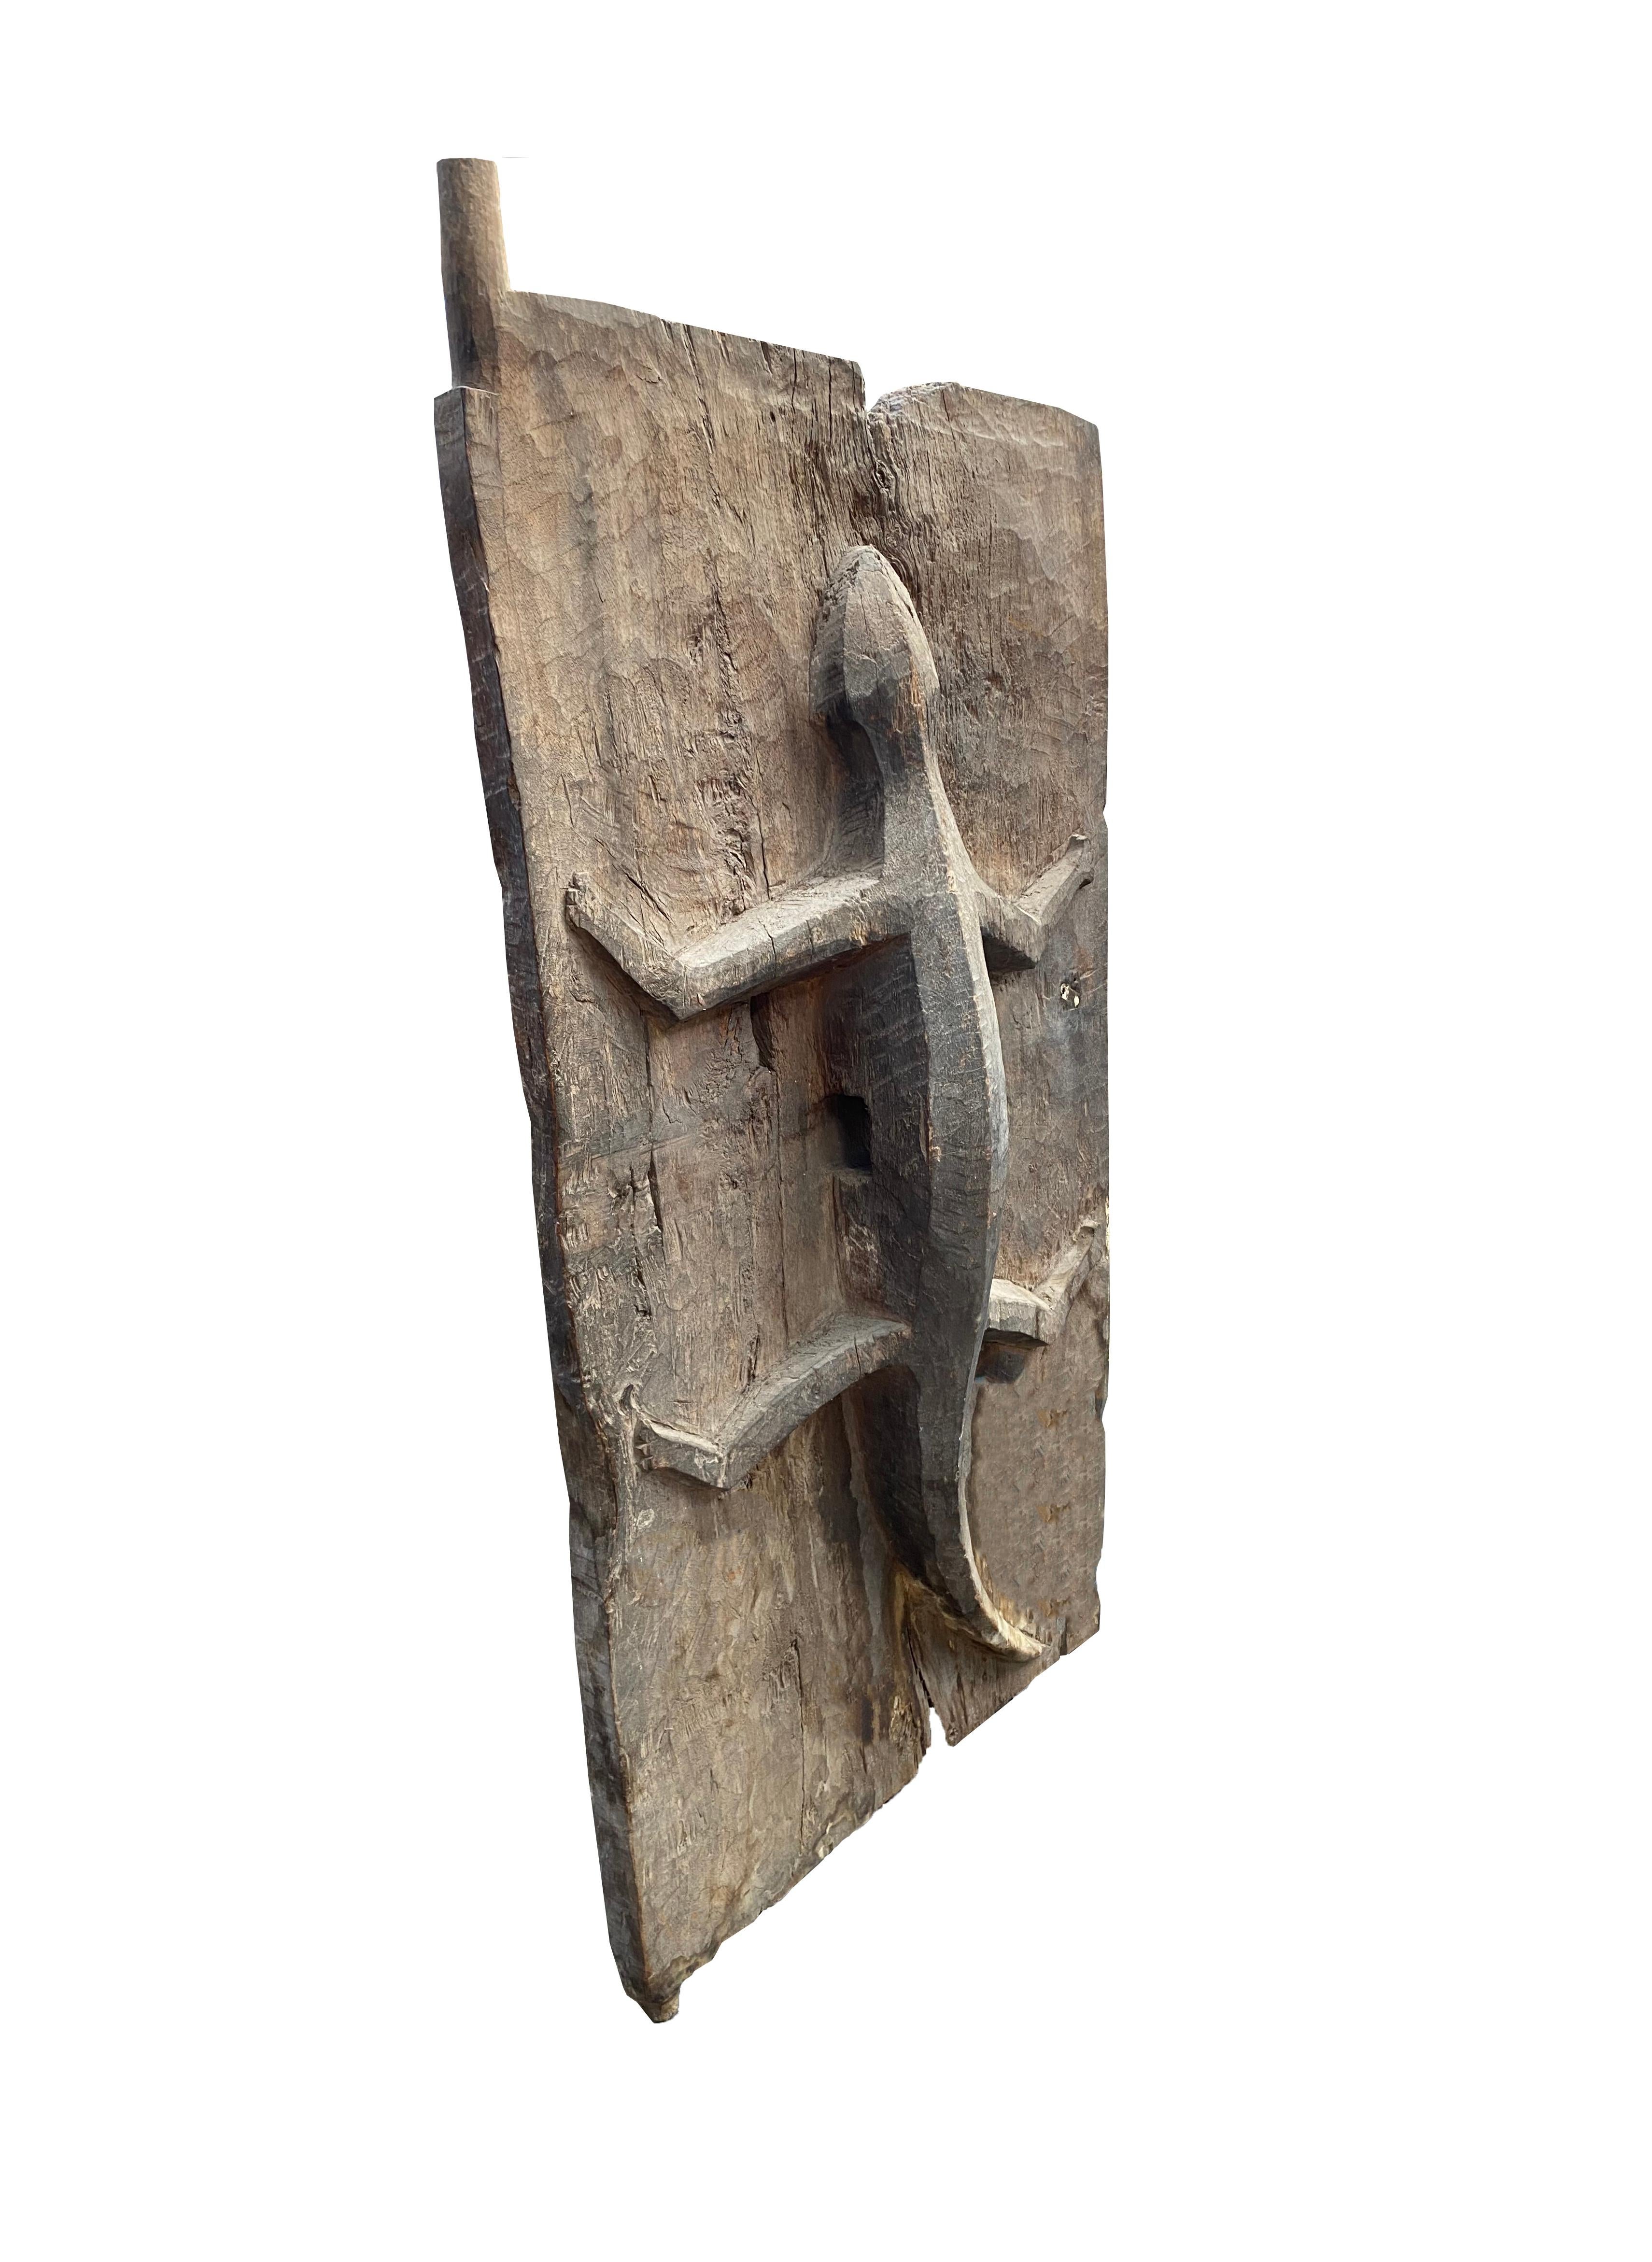 This rice granary door features a carved lizard and is from the Batak Tribe, from Lake Toba, central Sumatra. The lizard symbolises earth fertility amid Batak belief, responsible for fertility of the fields and harvesting. It thus makes sense to